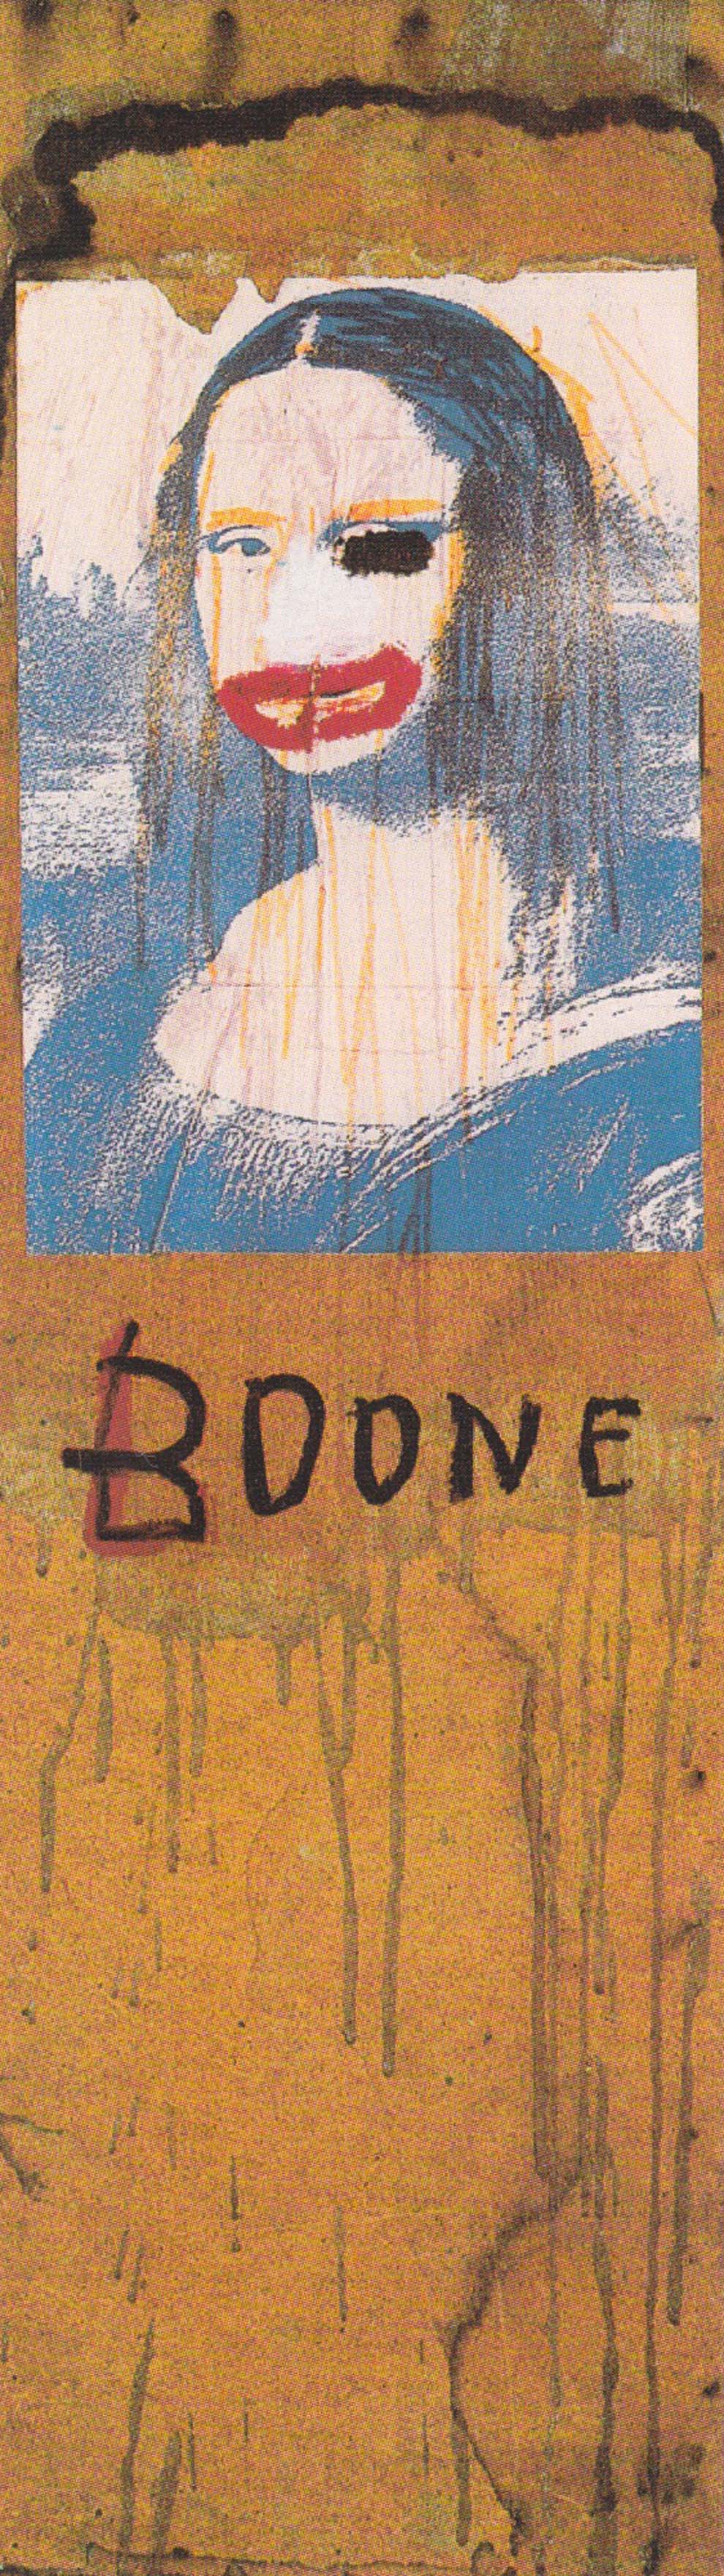 Mary Boone by Baquiat